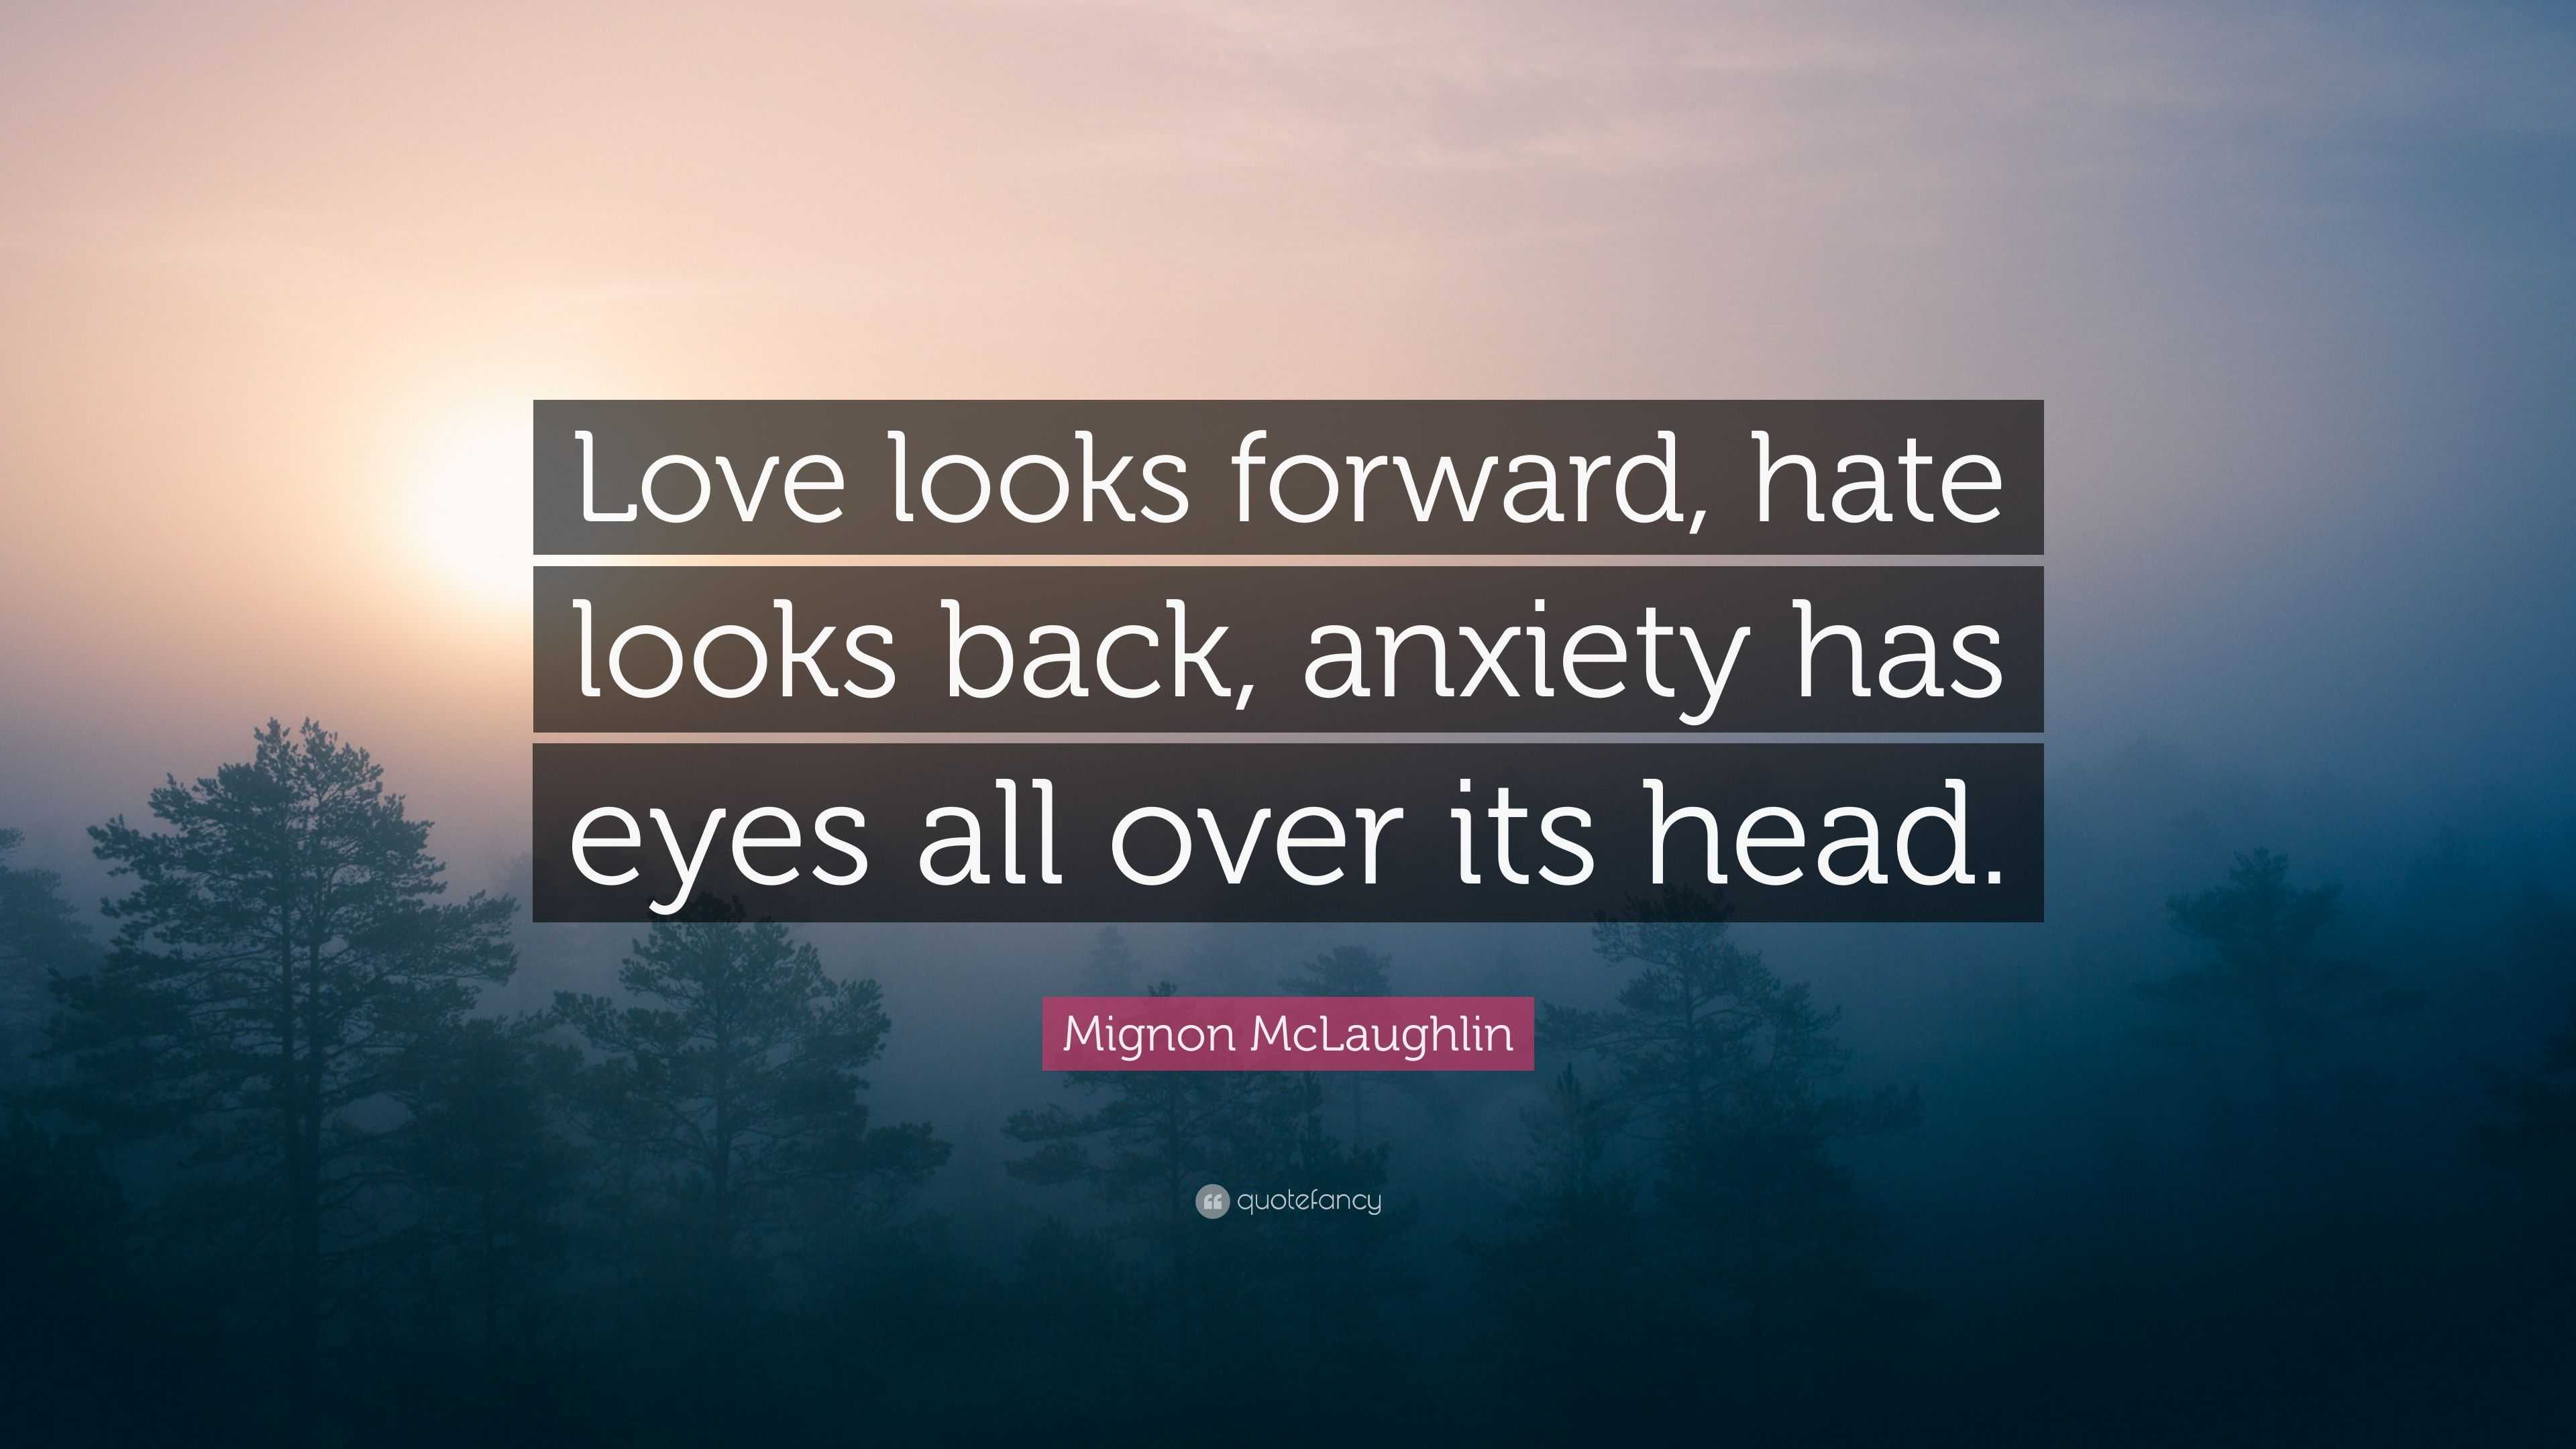 Mignon McLaughlin Quote “Love looks forward hate looks back anxiety has eyes